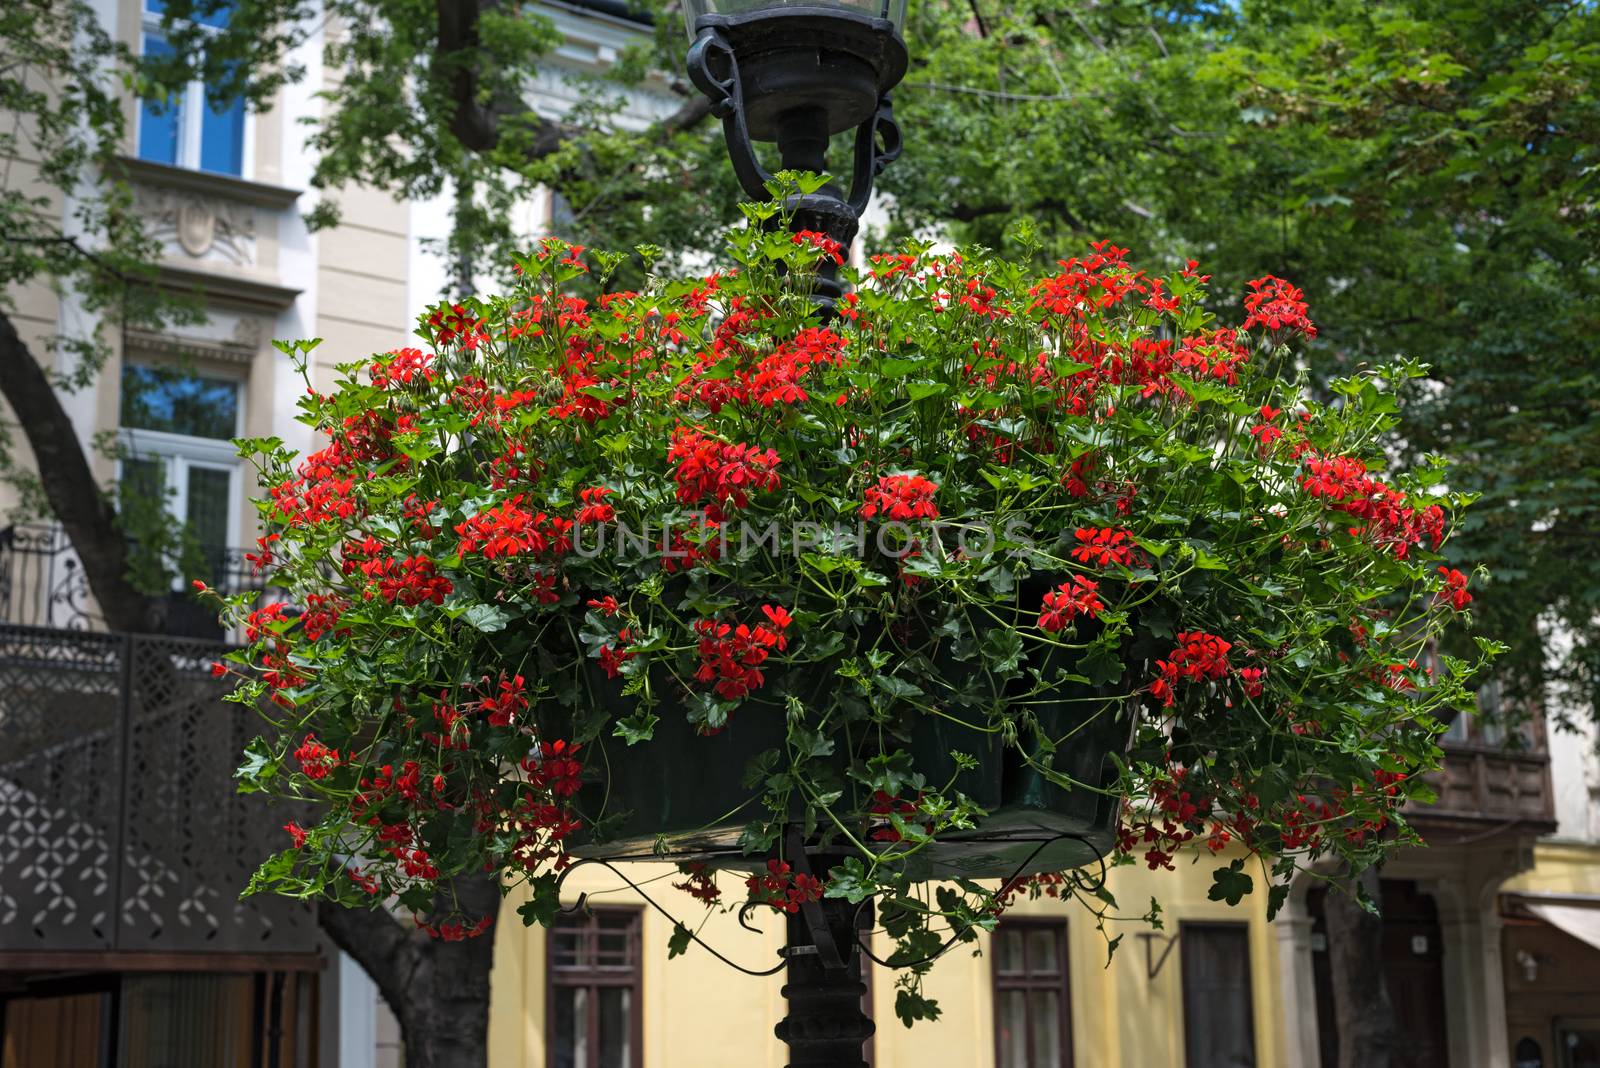 street lamp with hanging flower baskets by DNKSTUDIO